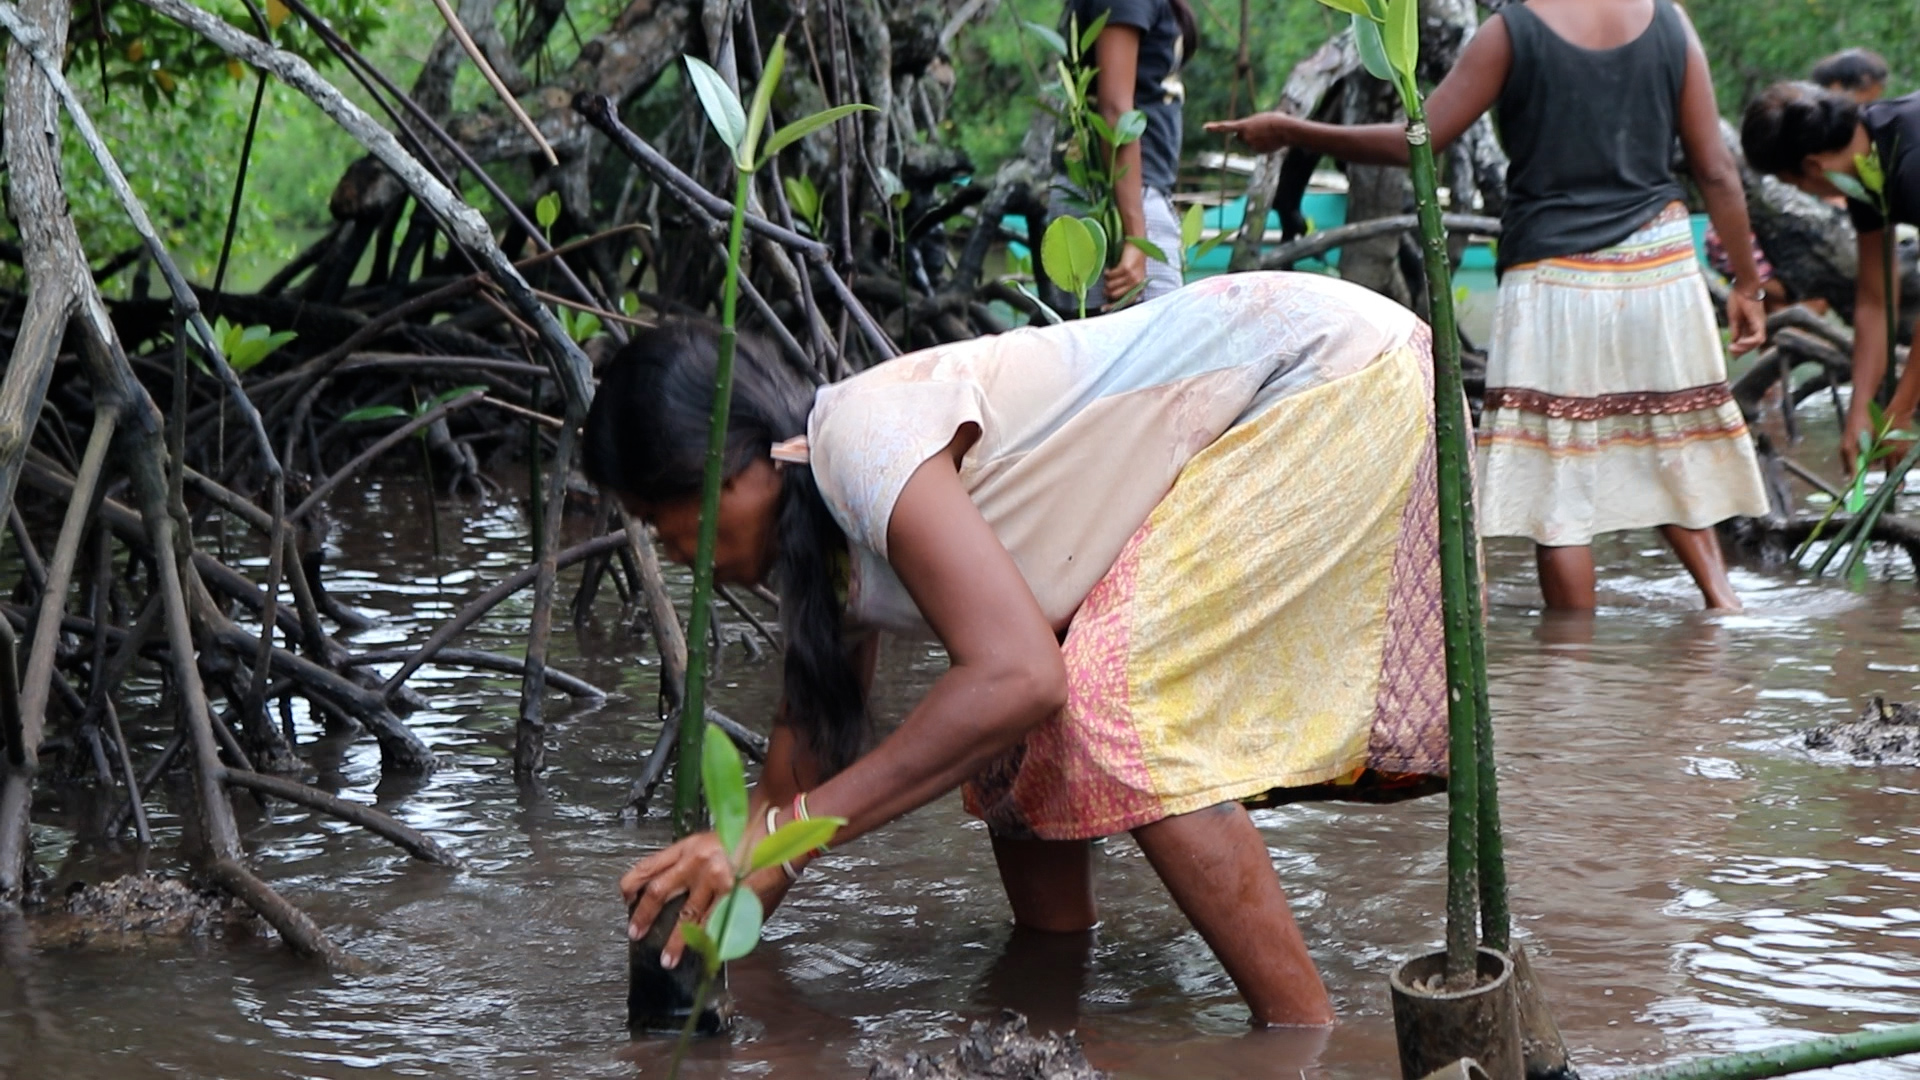 Woman conservation farmer in ankle-deep water planting conservation plants.